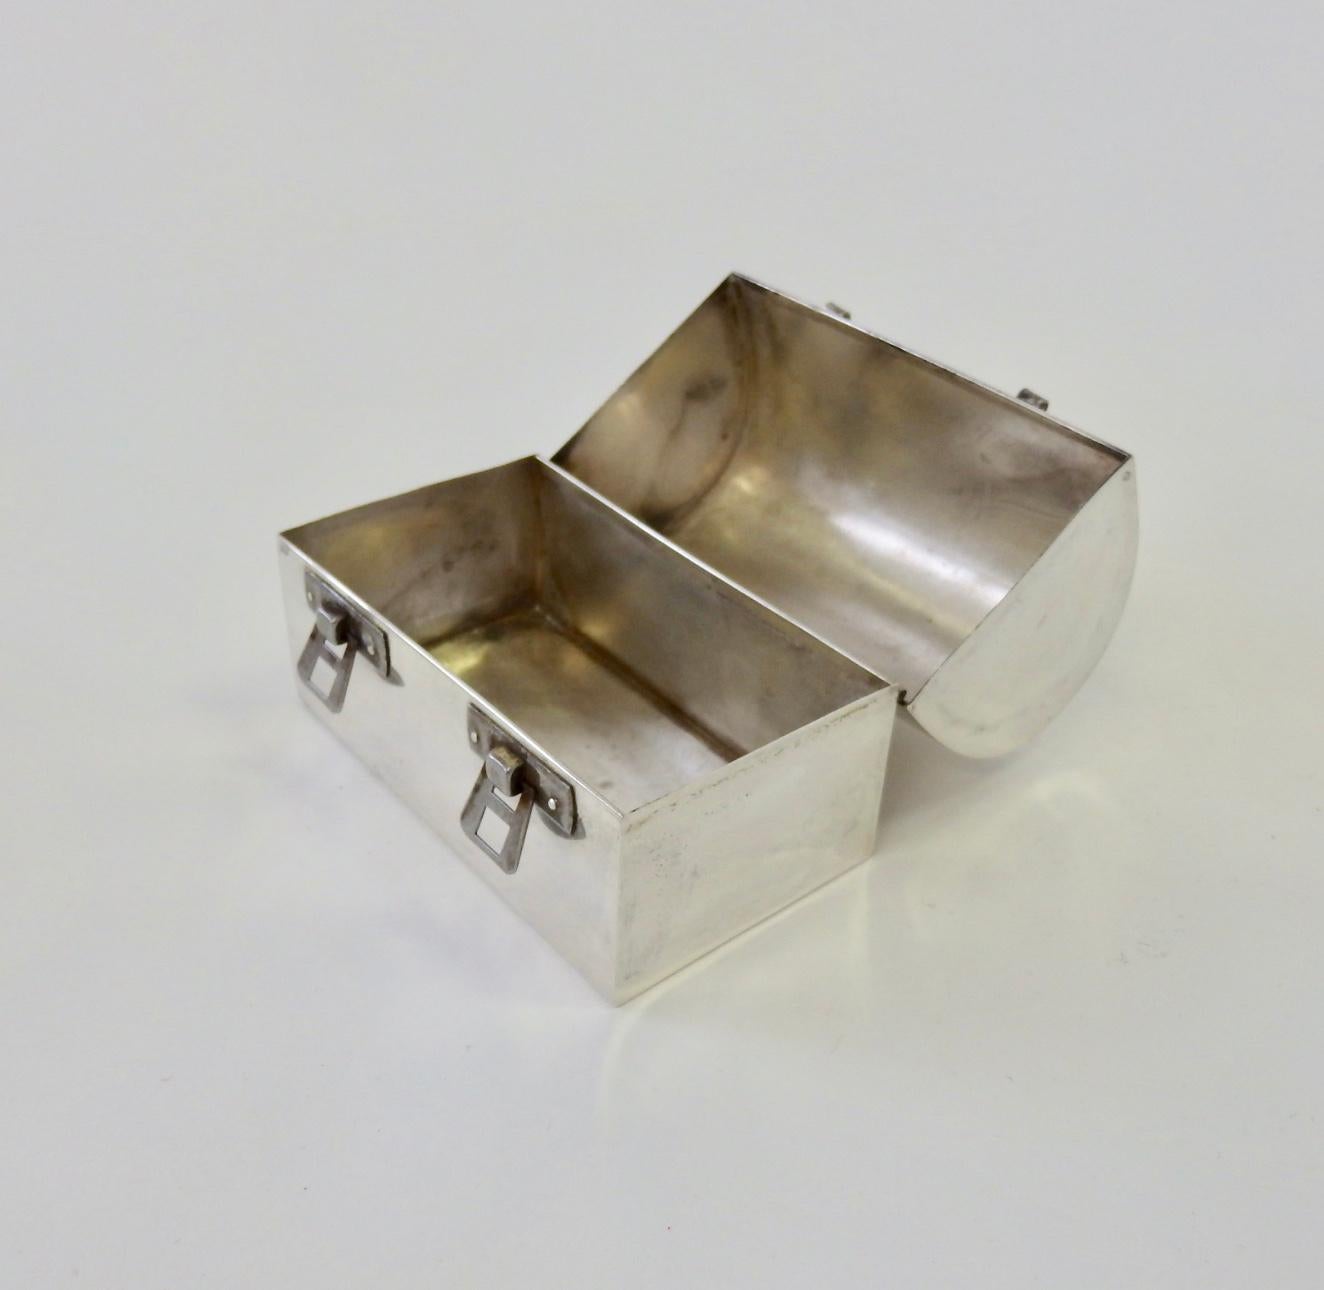 Cartier hand formed evening purse clutch in the shape of a diminutive lunch box. Formed in sterling with steel latches.